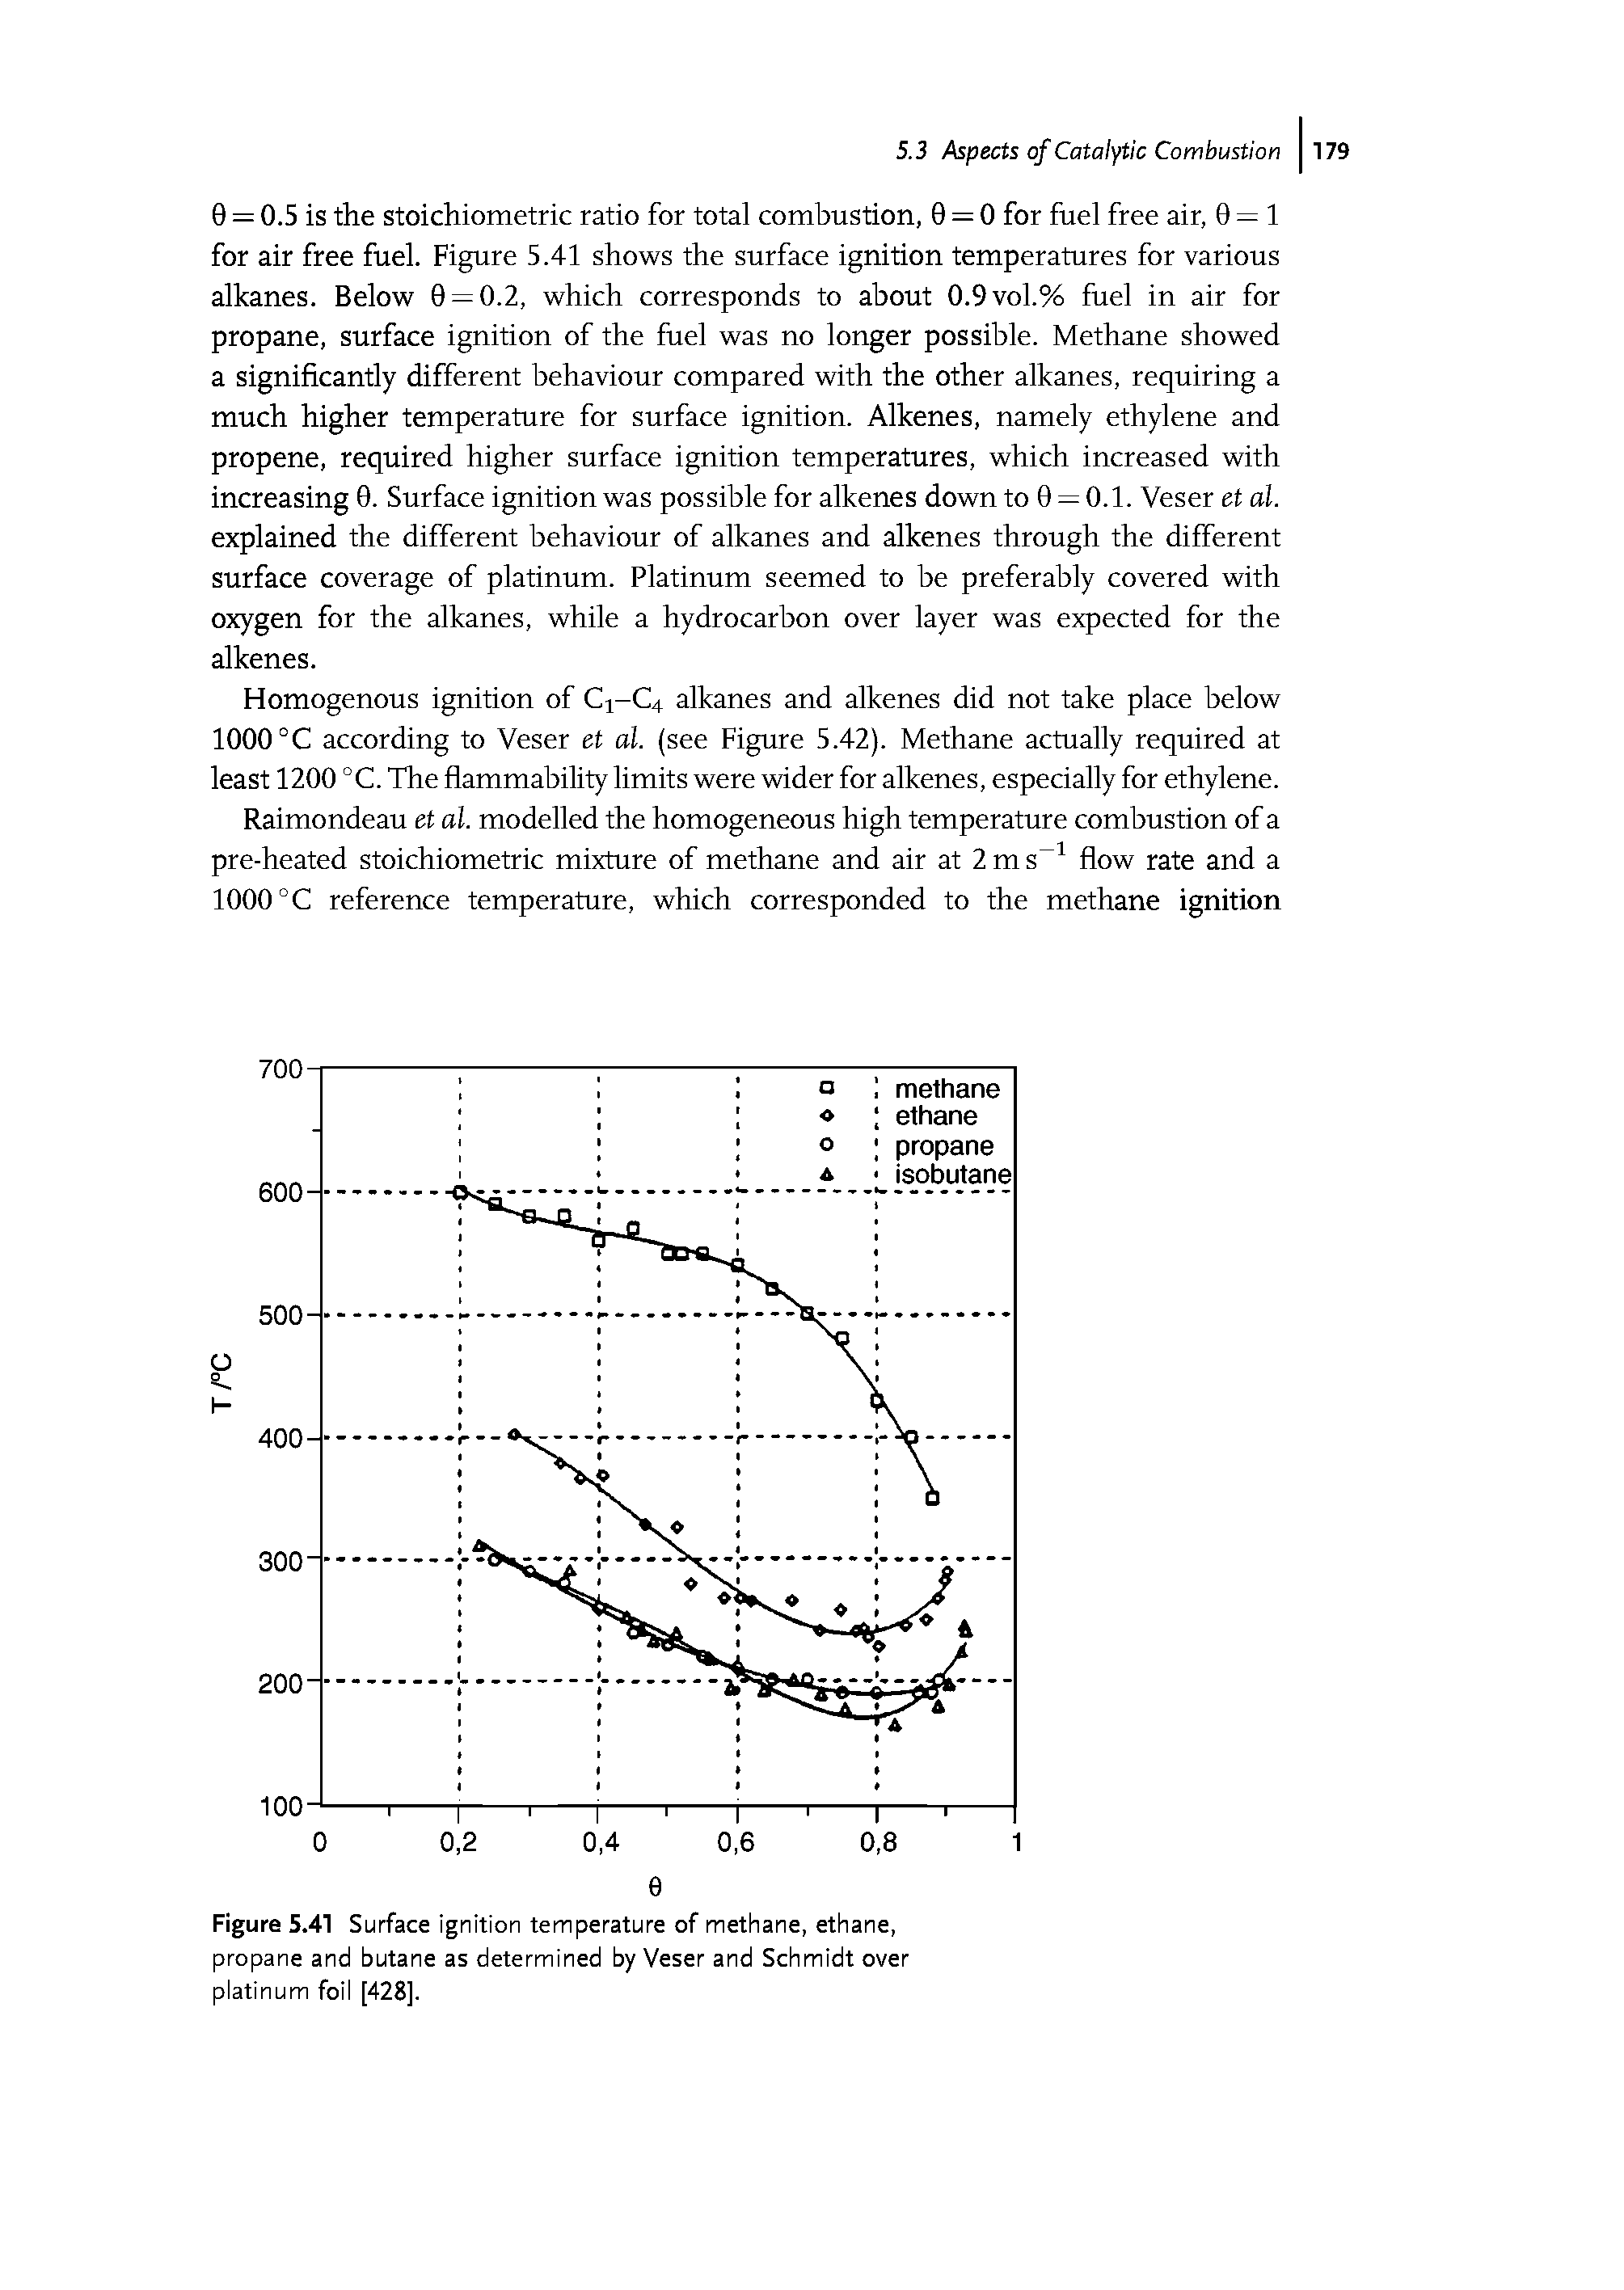 Figure 5.41 Surface ignition temperature of methane, ethane, propane and butane as determined by Veser and Schmidt over platinum foil [428].